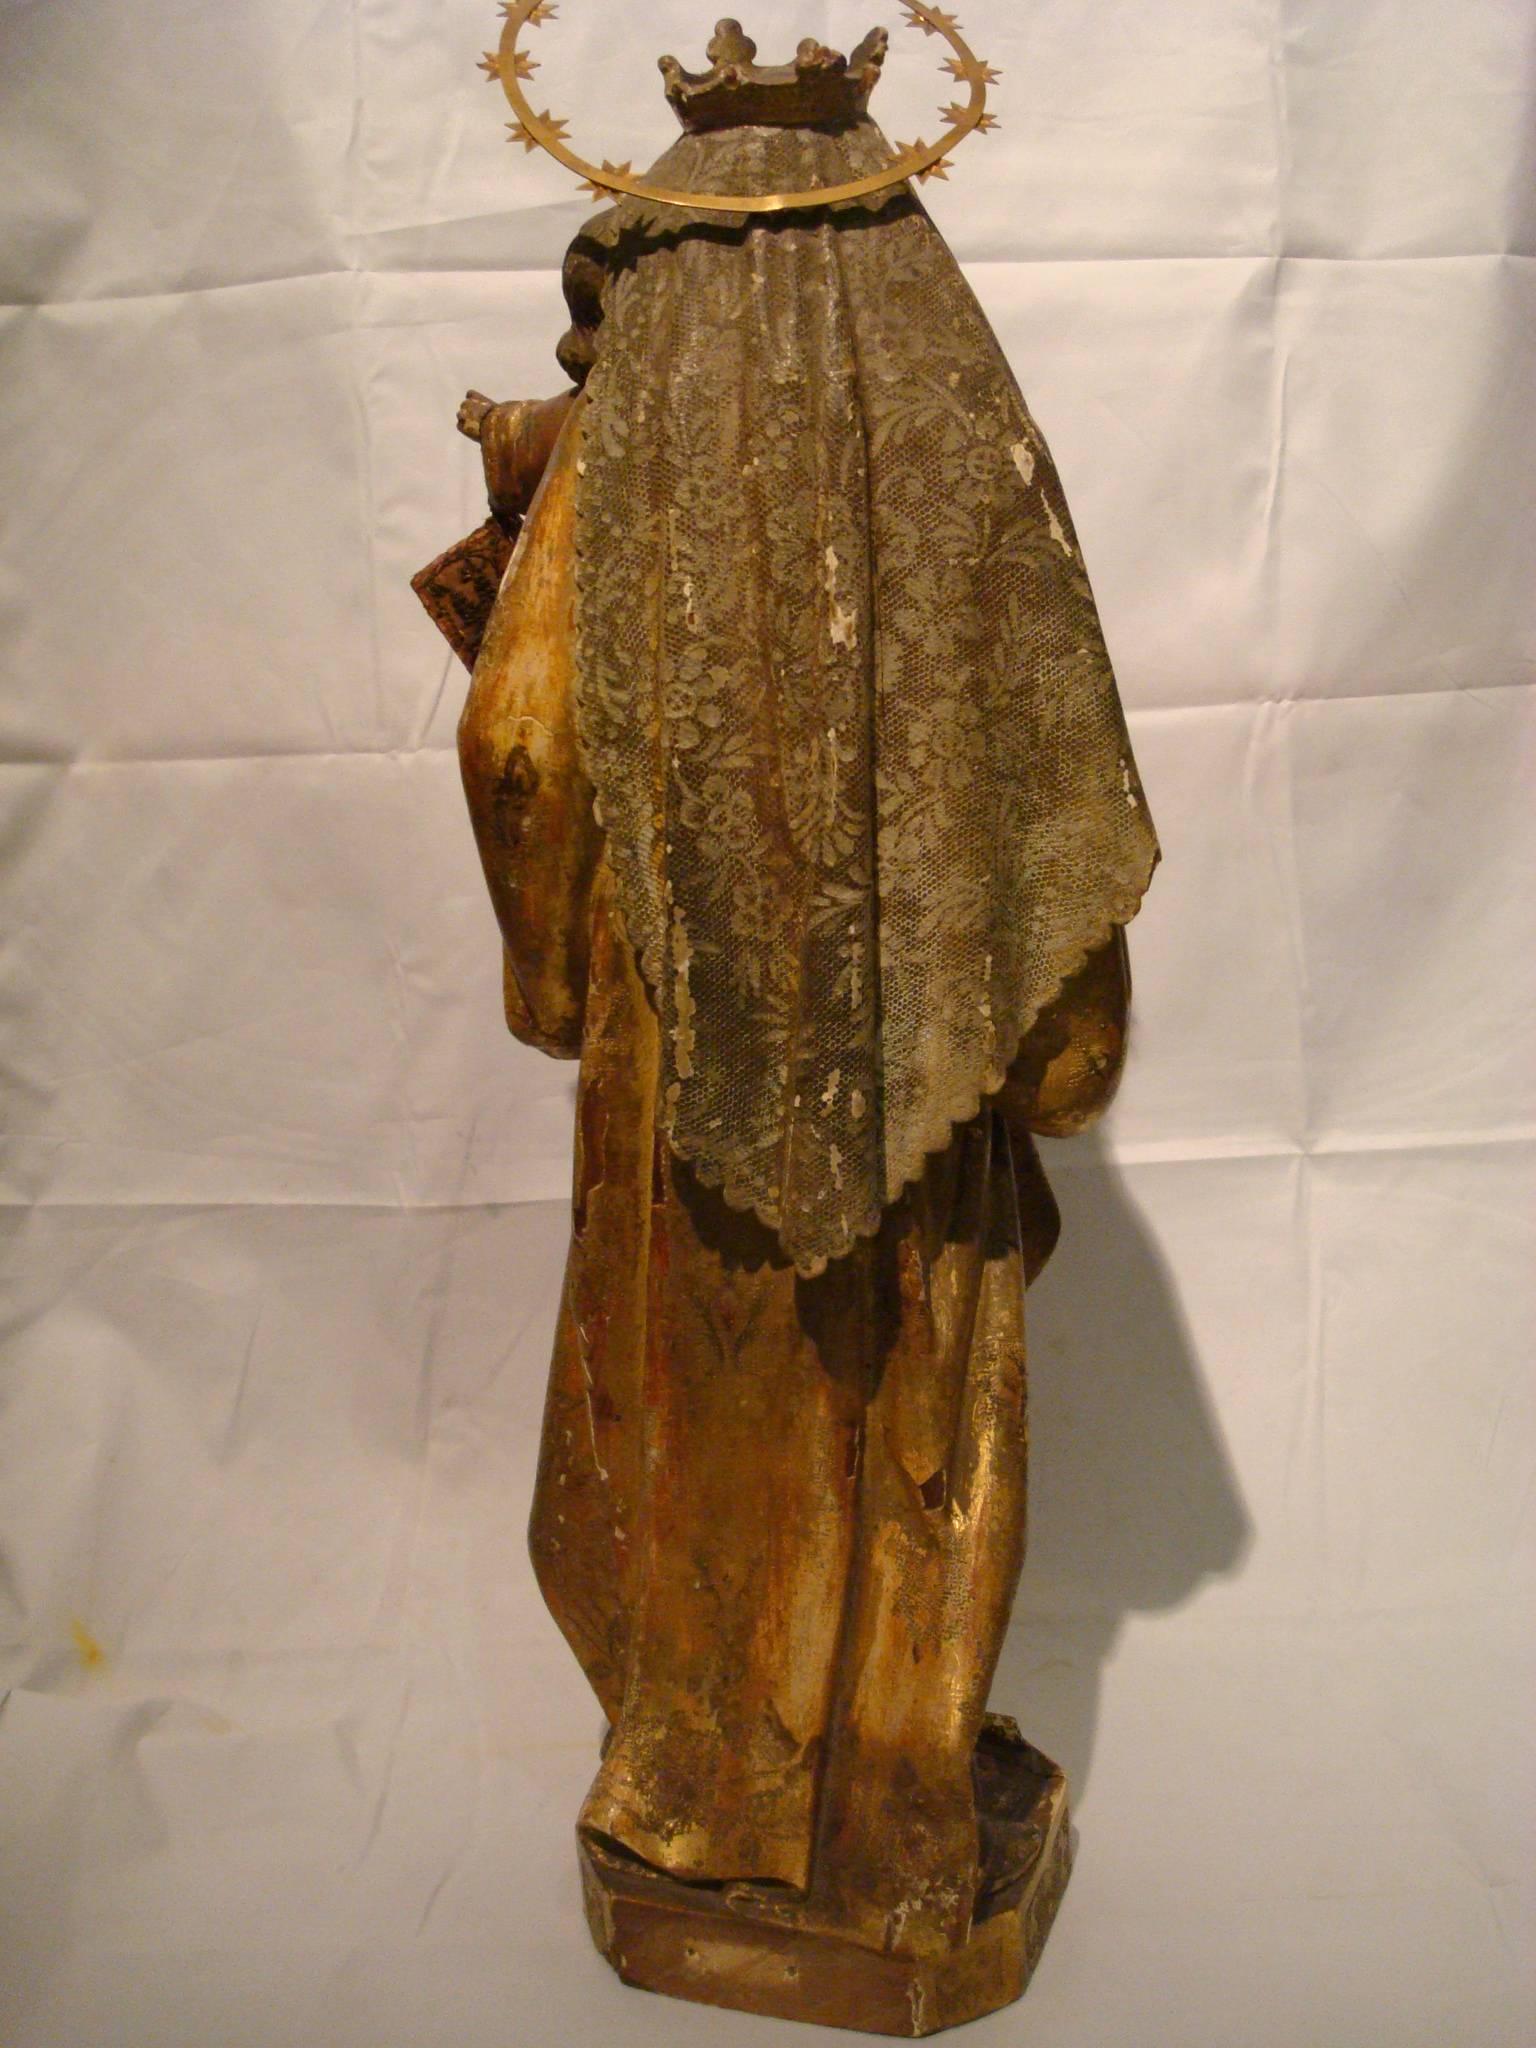 Baroque 19th C. Wooden Sculpture Virgin Mary with Jesus - Wood Carved Polychrome Figure